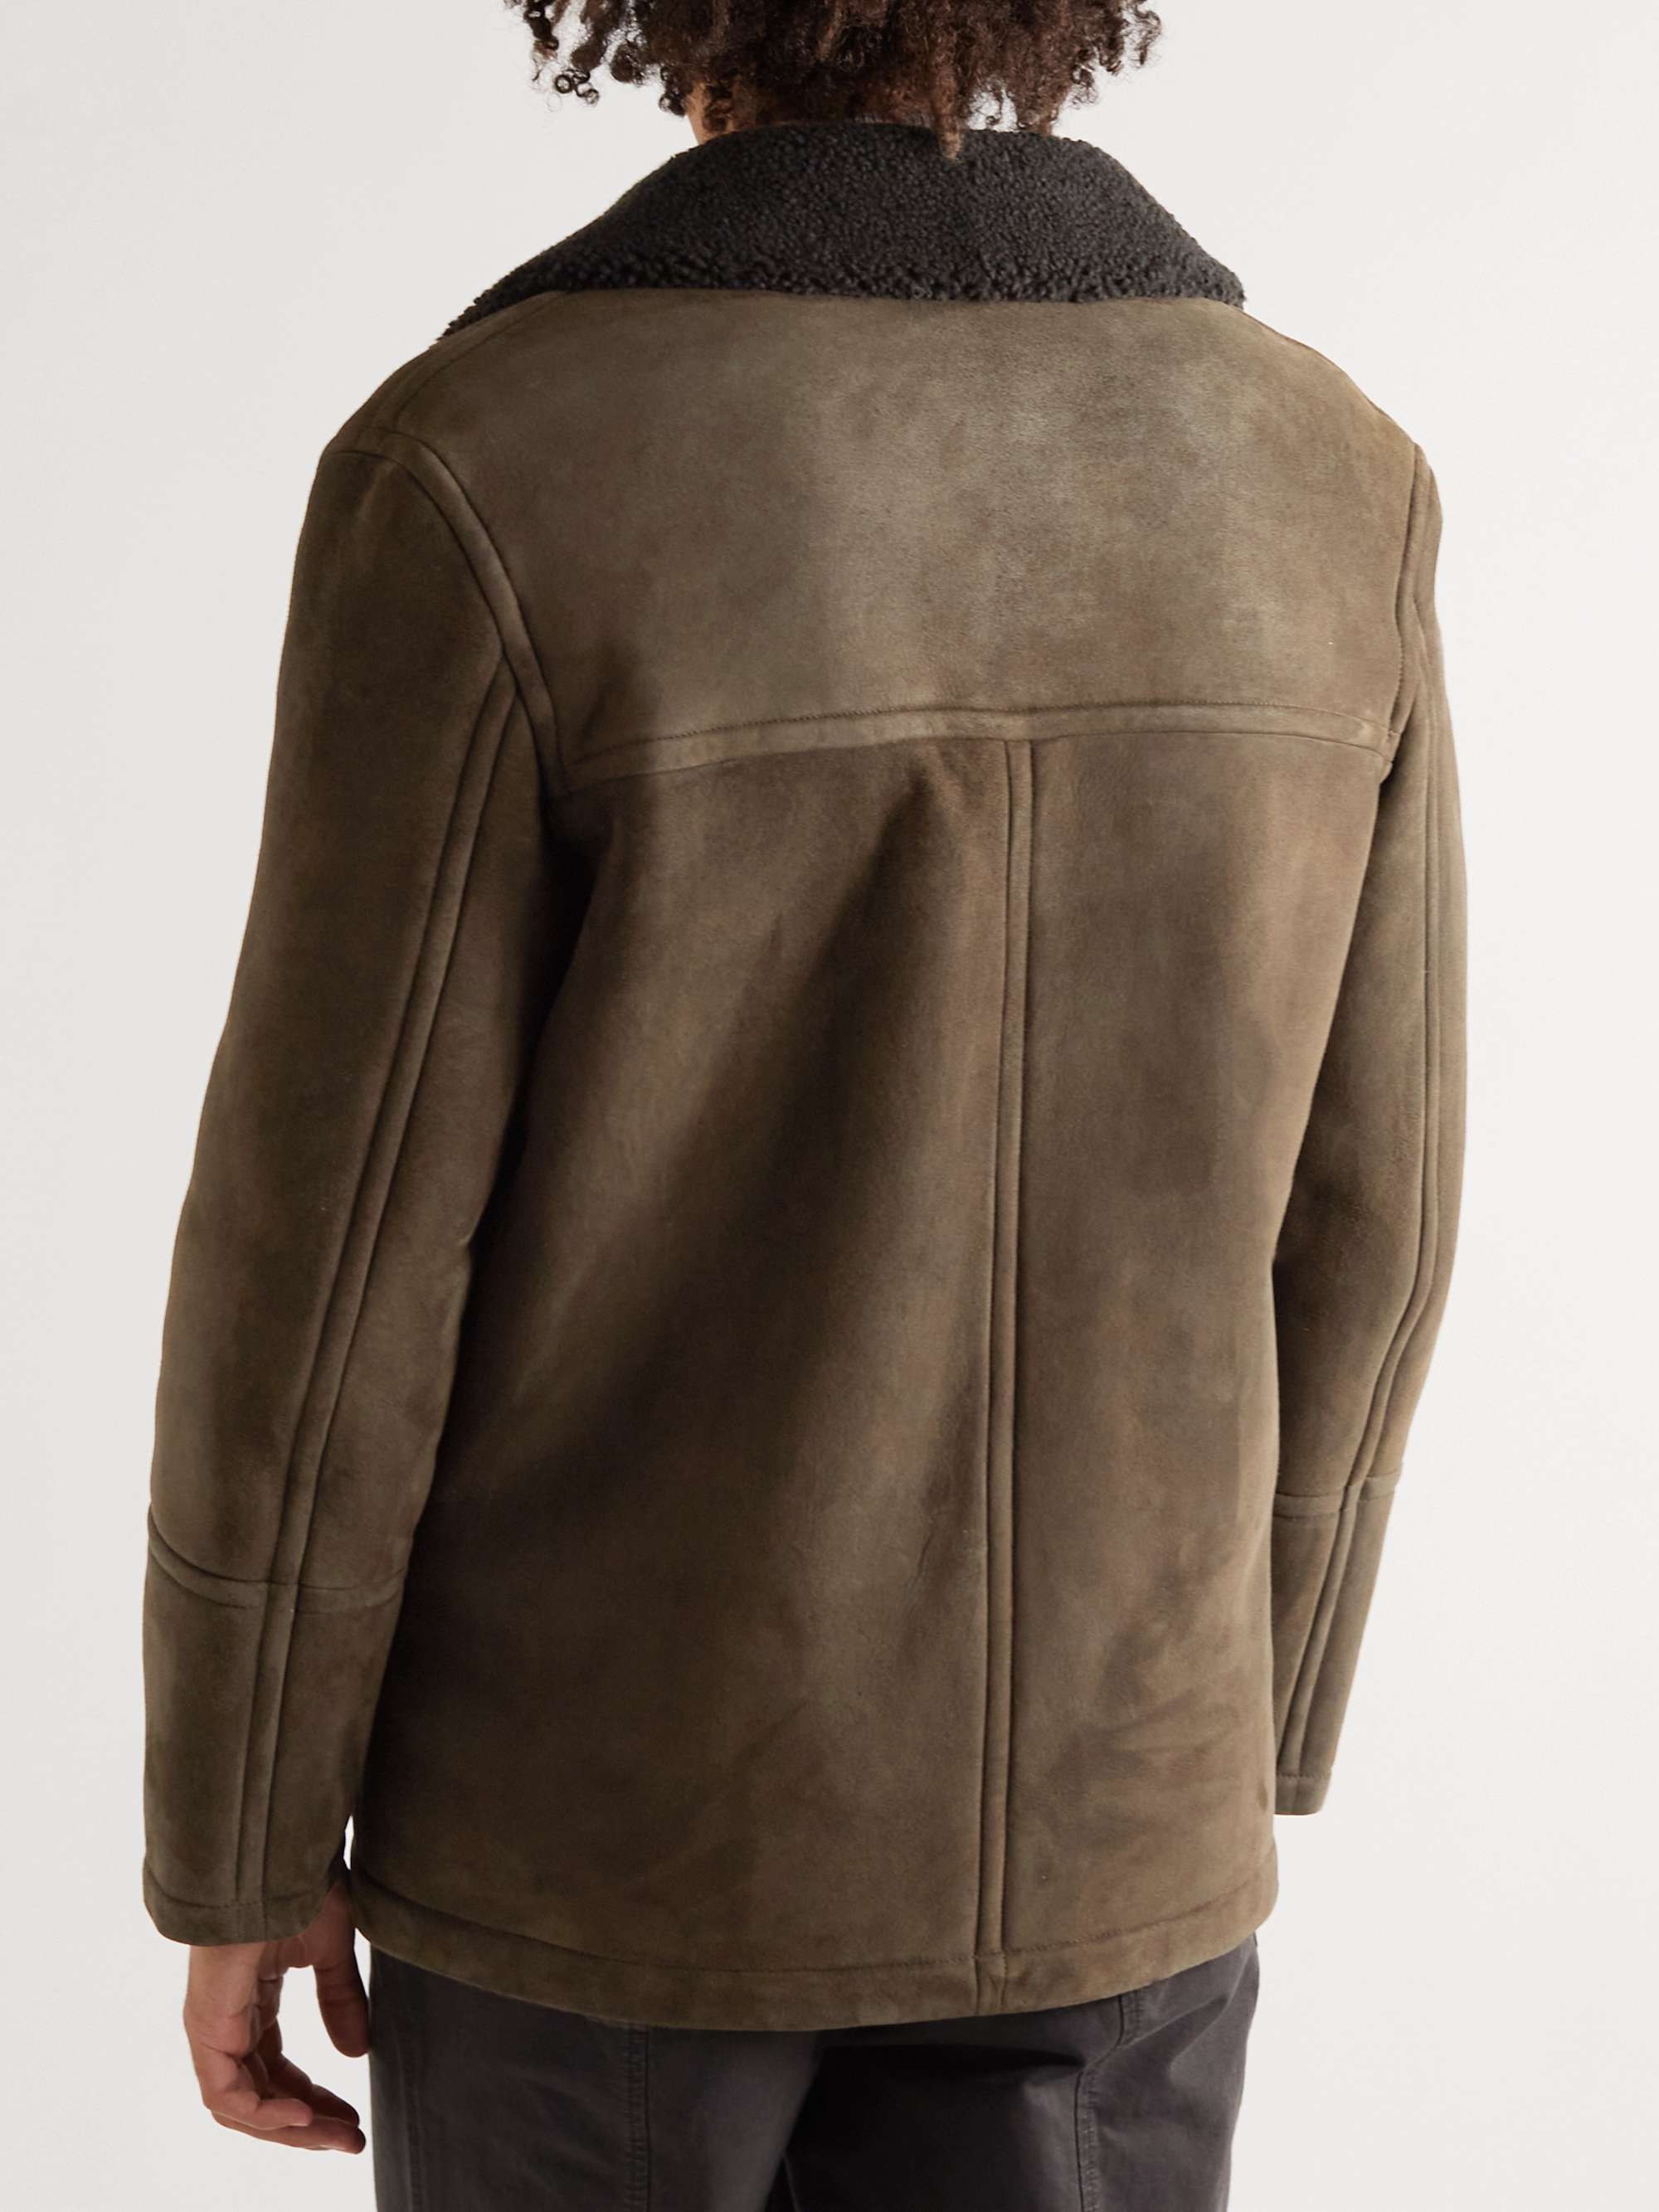 YVES SALOMON Double-Breasted Shearling-Lined Suede Peacoat